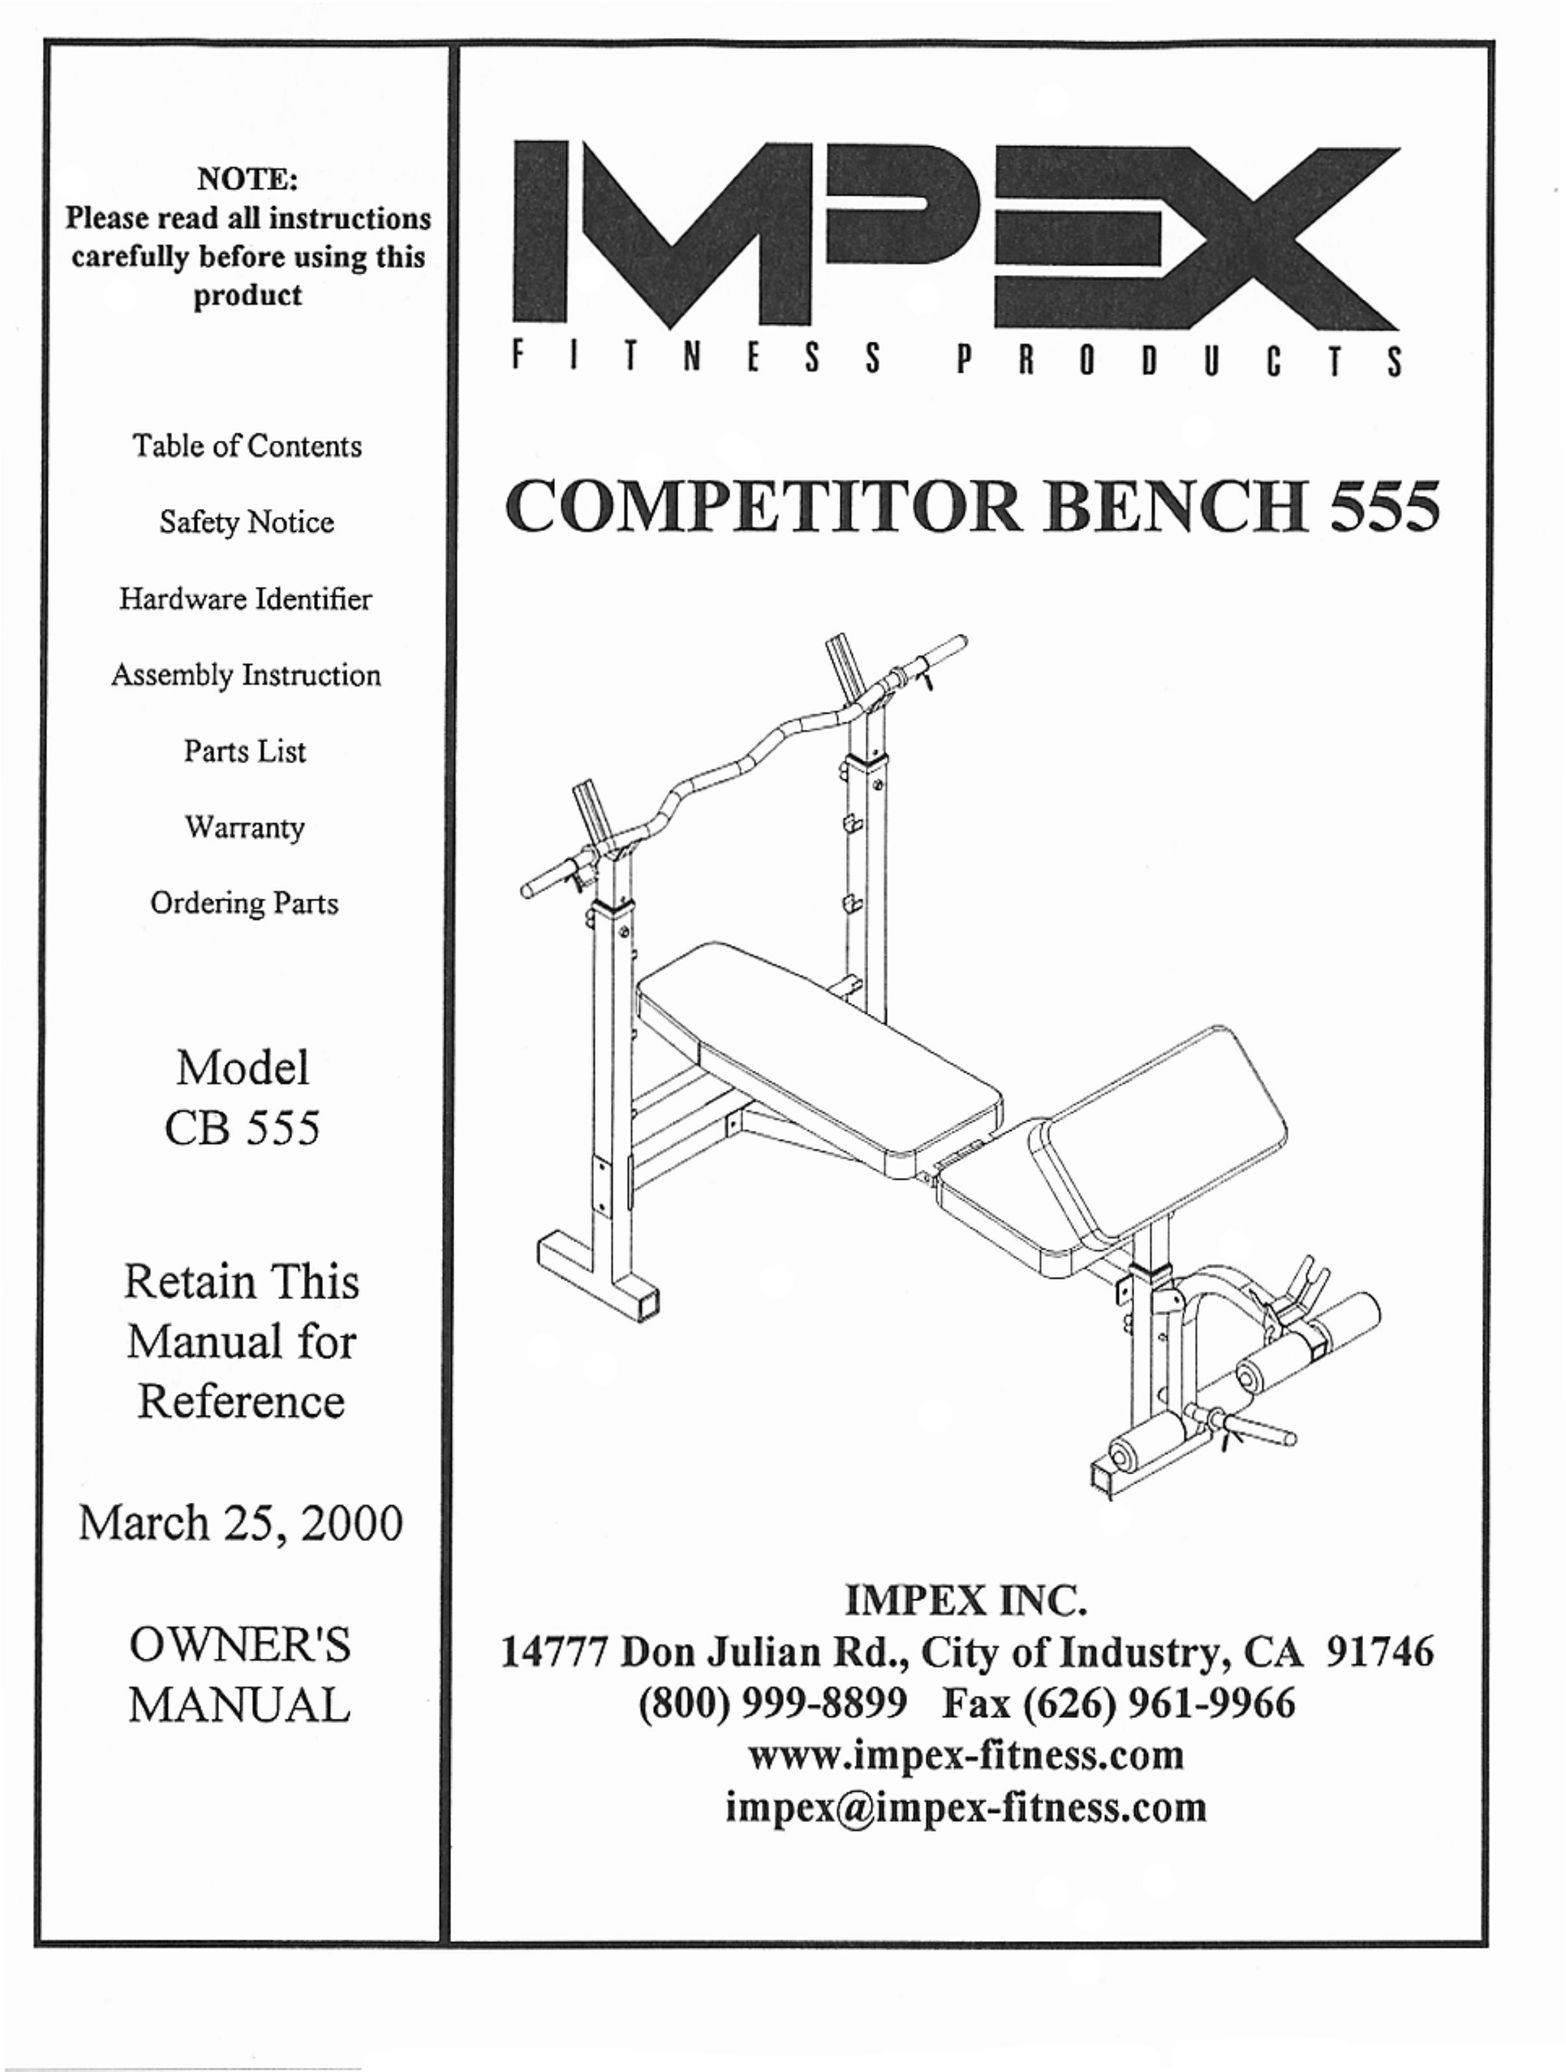 Impex CB 555 Home Gym User Manual